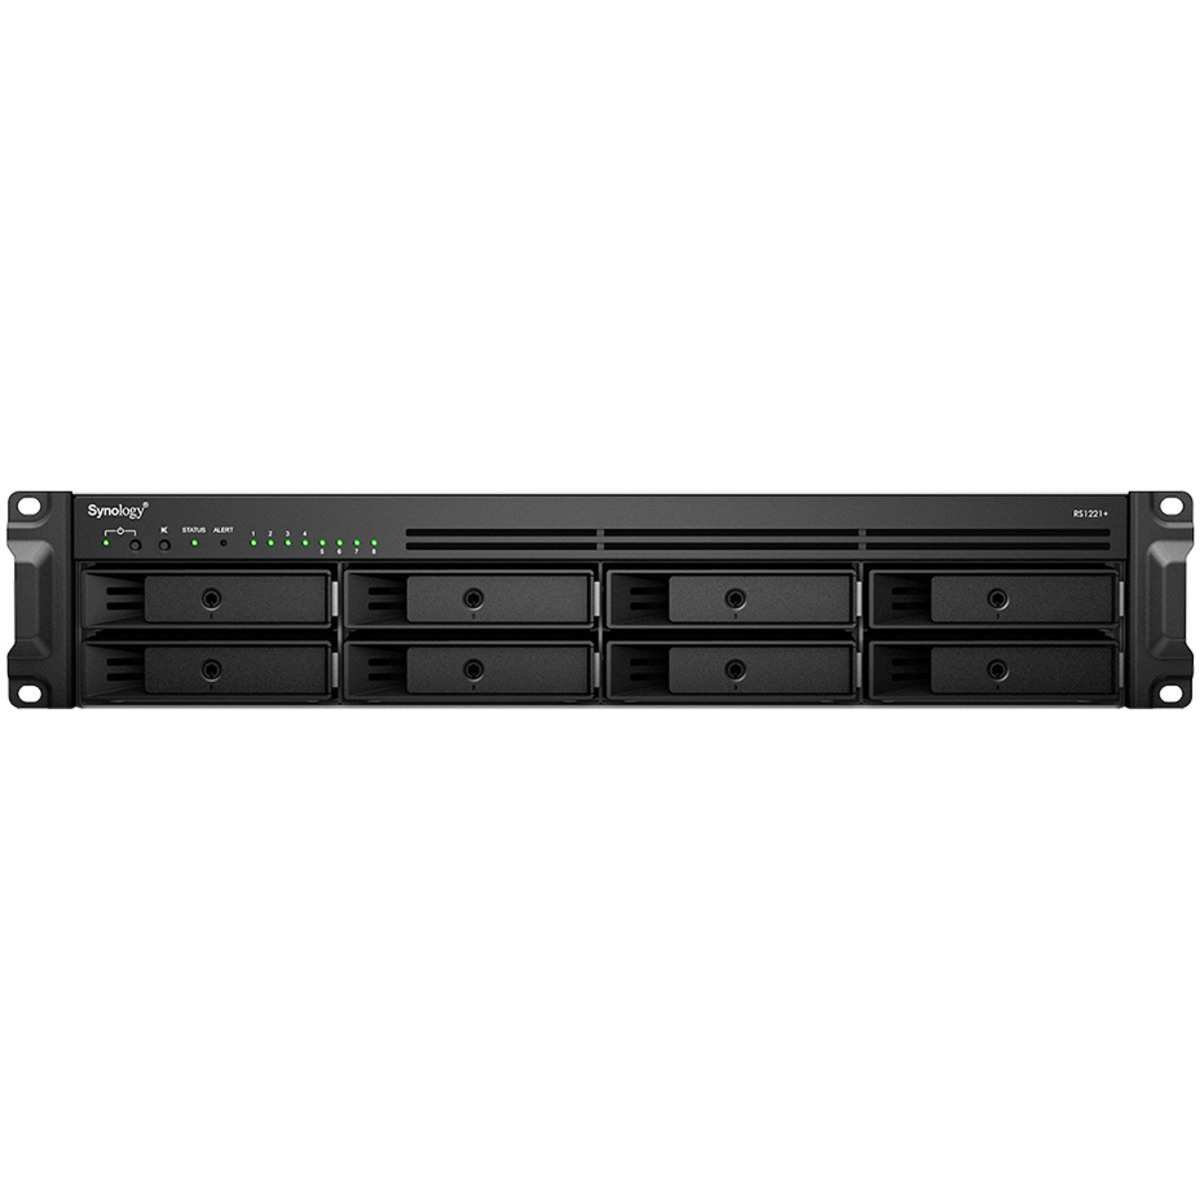 Synology RackStation RS1221RP+ 1.9tb 8-Bay RackMount Multimedia / Power User / Business NAS - Network Attached Storage Device 4x480gb Synology SAT5210 Series SAT5210-480G 2.5 530/500MB/s SATA 6Gb/s SSD ENTERPRISE Class Drives Installed - Burn-In Tested - FREE RAM UPGRADE RackStation RS1221RP+